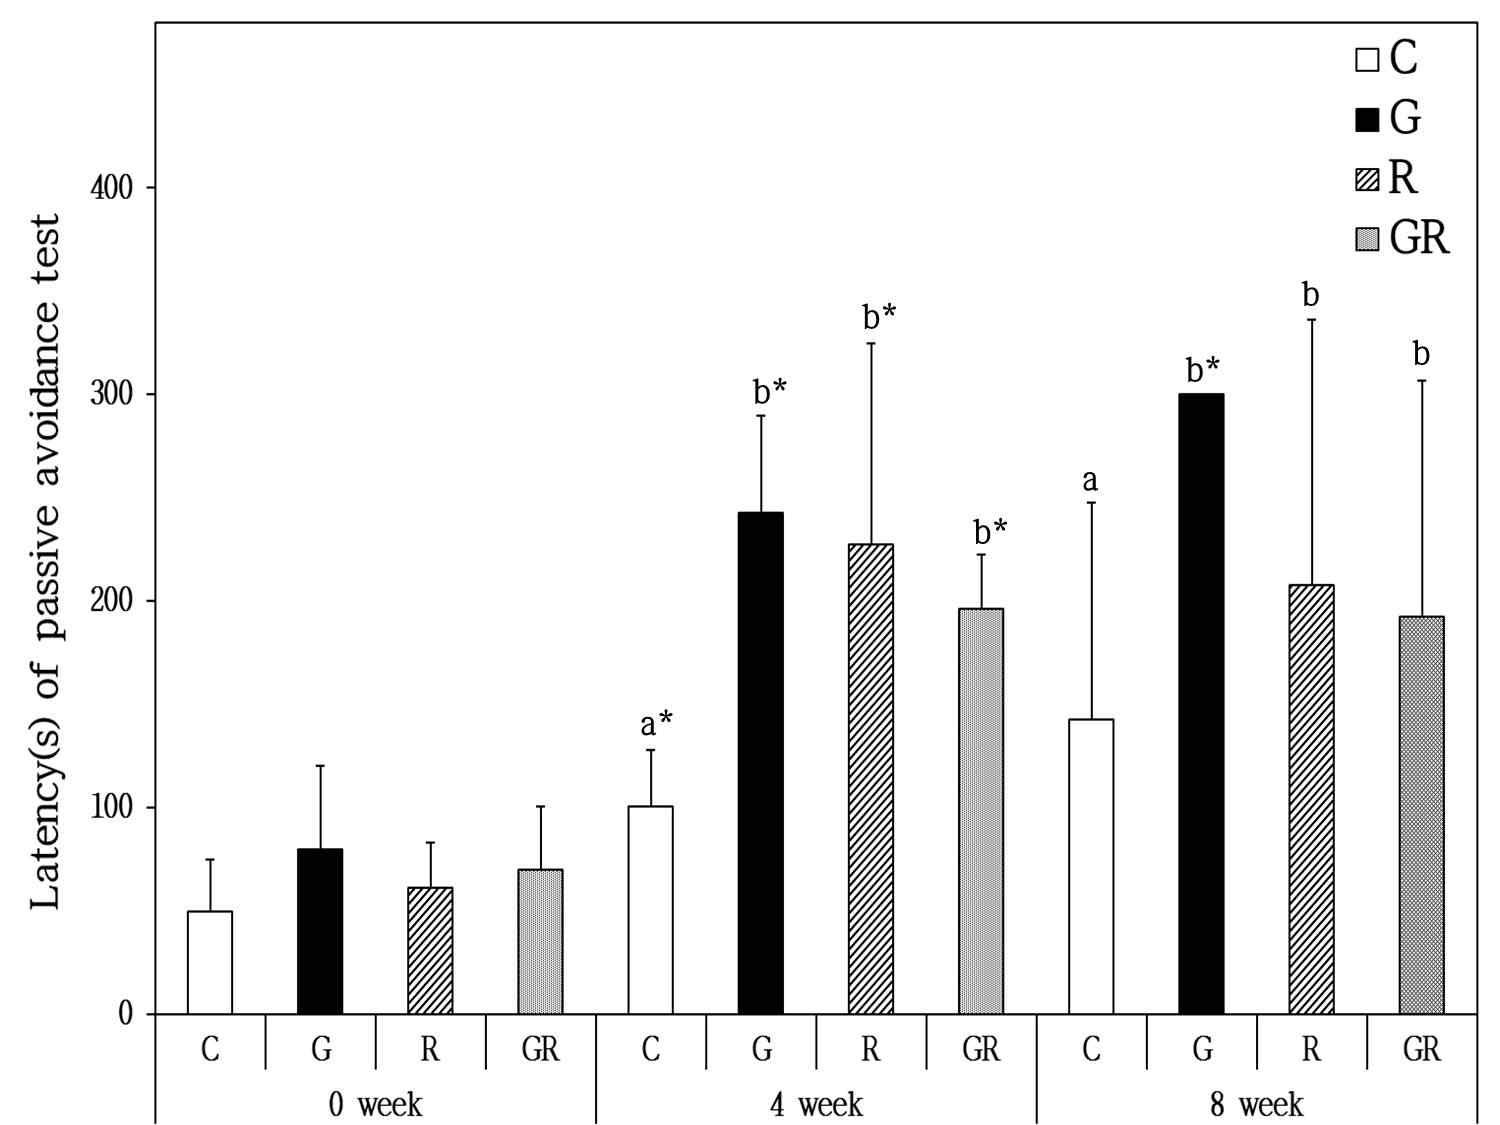 The effects of Ginseng Radix and Rehmanniae Radix extracts on B6C3-Tg mice in the latency(s) for passive avoidance test. C, Control Group; G, Ginseng Group; R, Rehmanniae Group; GR, Ginseng & Rehmanniae Group. Different superscript letter(a,b) mean significantly different between all the experimental groups at p<0.05 by Duncan's multiple range test. * : Mean significantly different between all the experimental groups at p<0.05 by Wilcoxon's signed-ranks test